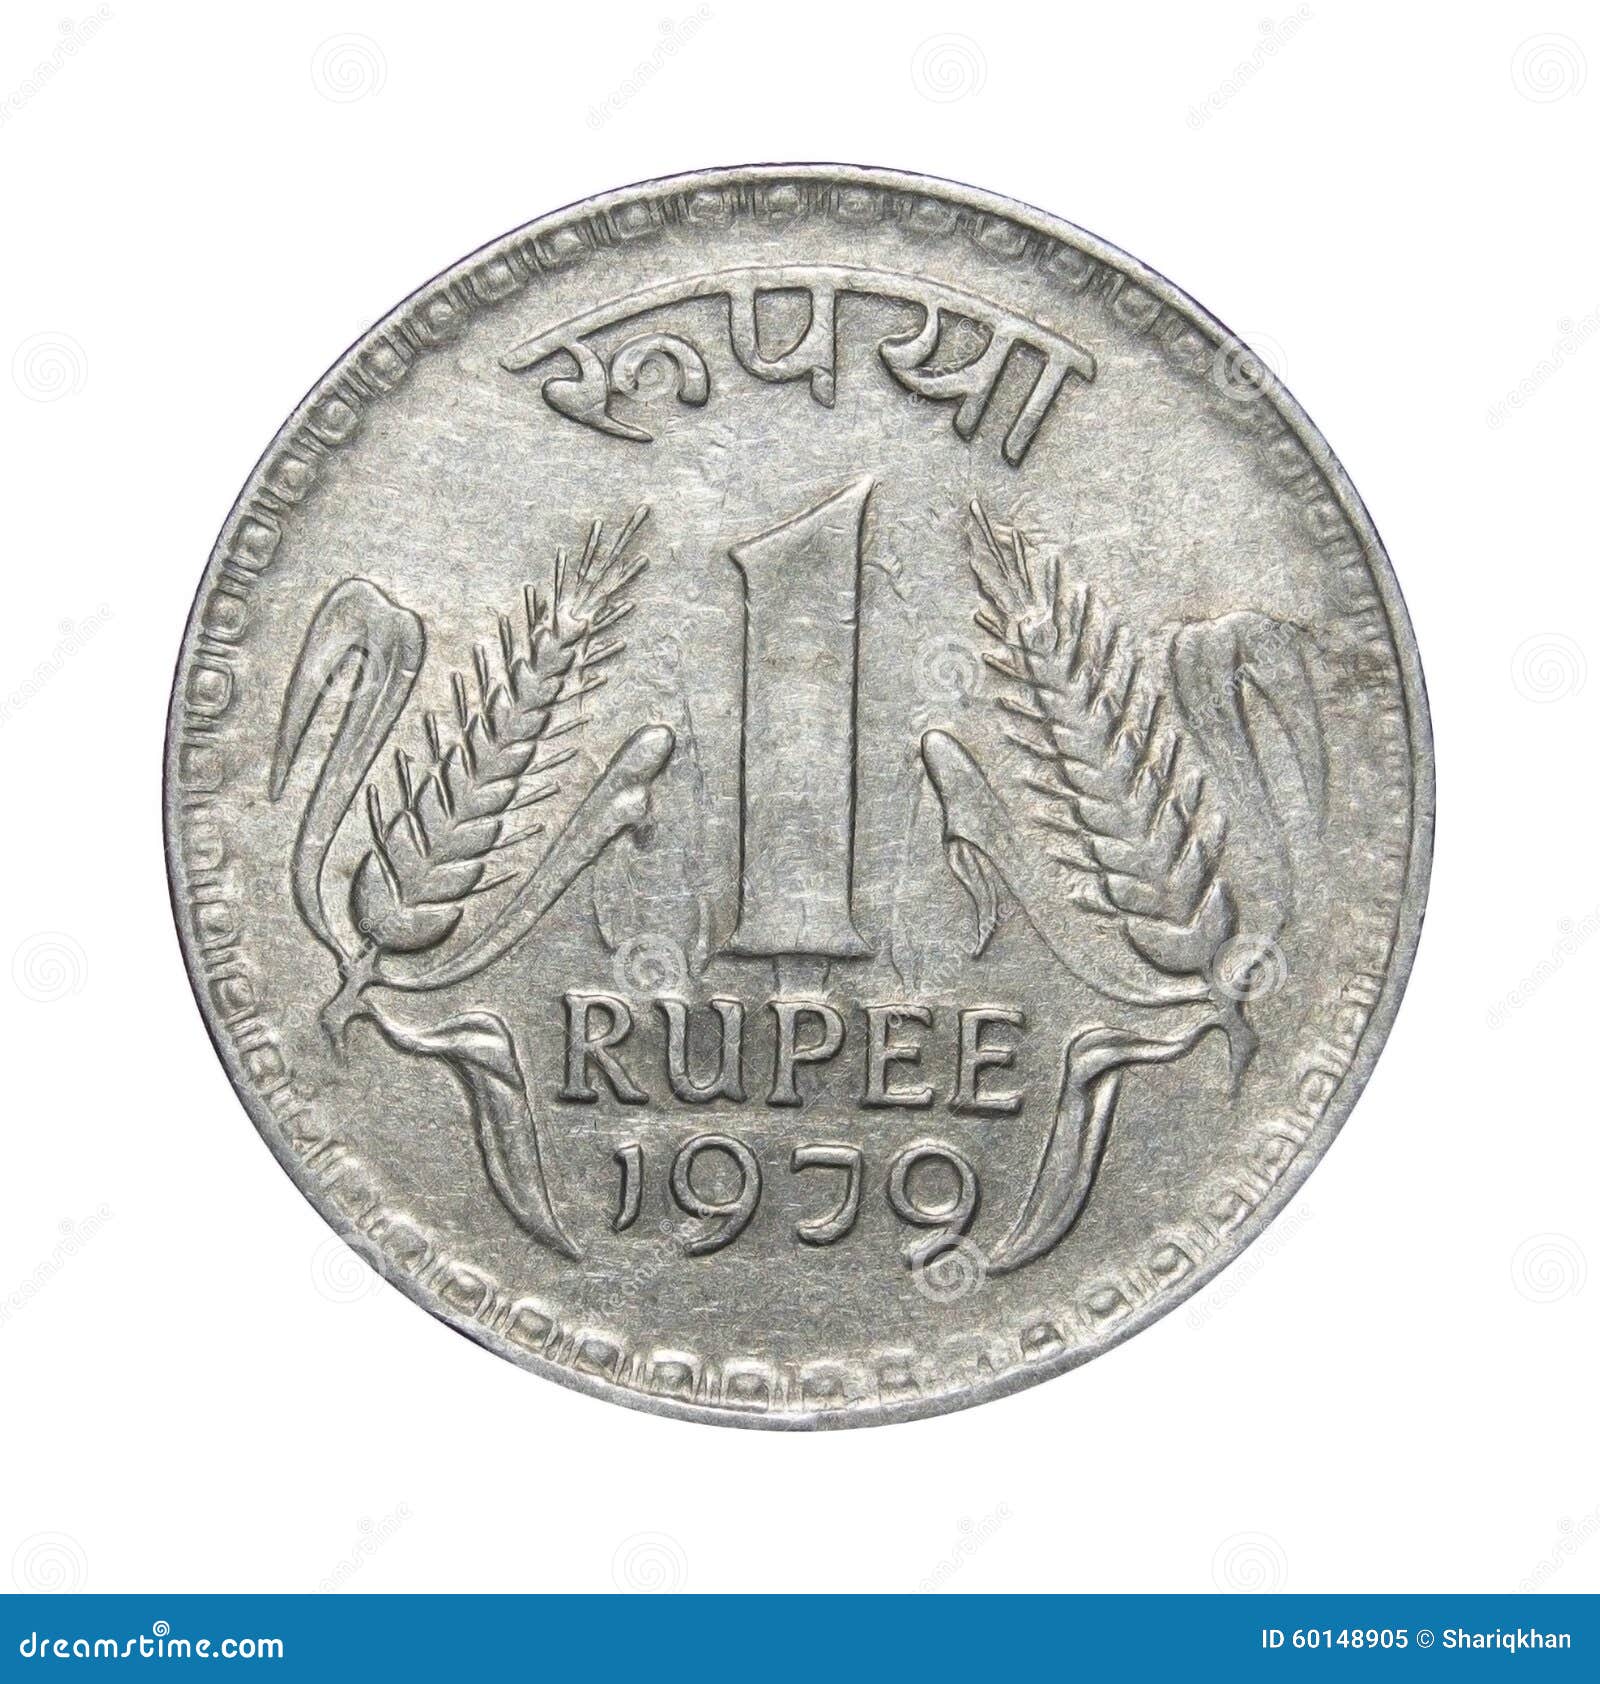 Commemorative Coins - 1 Rupee - Page 1 - JJ Collection